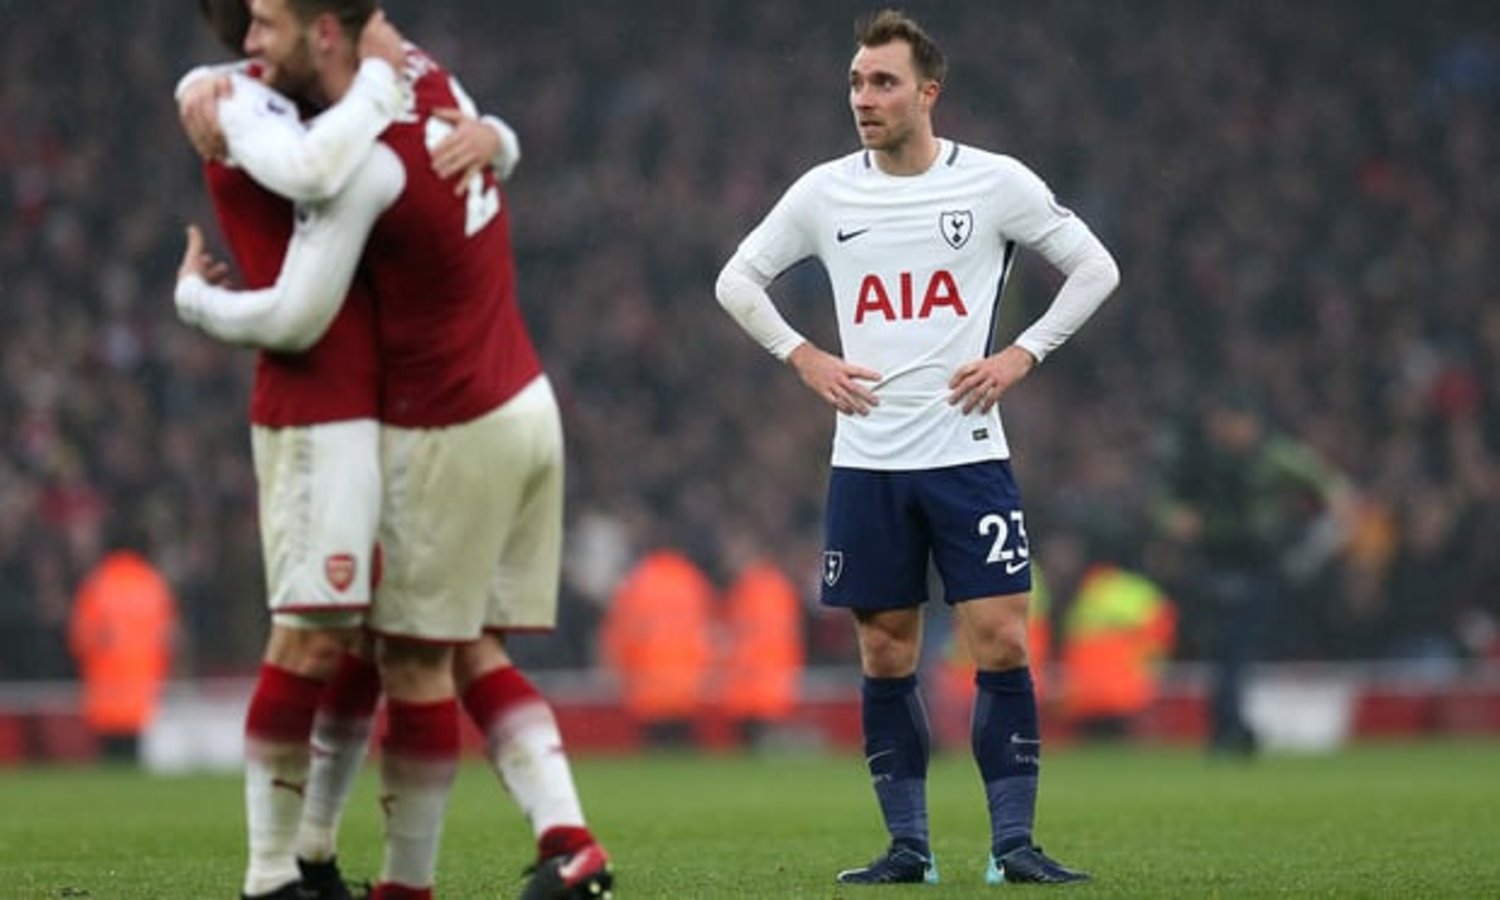  Christian Eriksen’s face shows the disappointment after Tottenham lost the north London derby 2-0 at Arsenal on Saturday. Photograph: Tottenham Hotspur FC/(Credit too long, see caption)
 